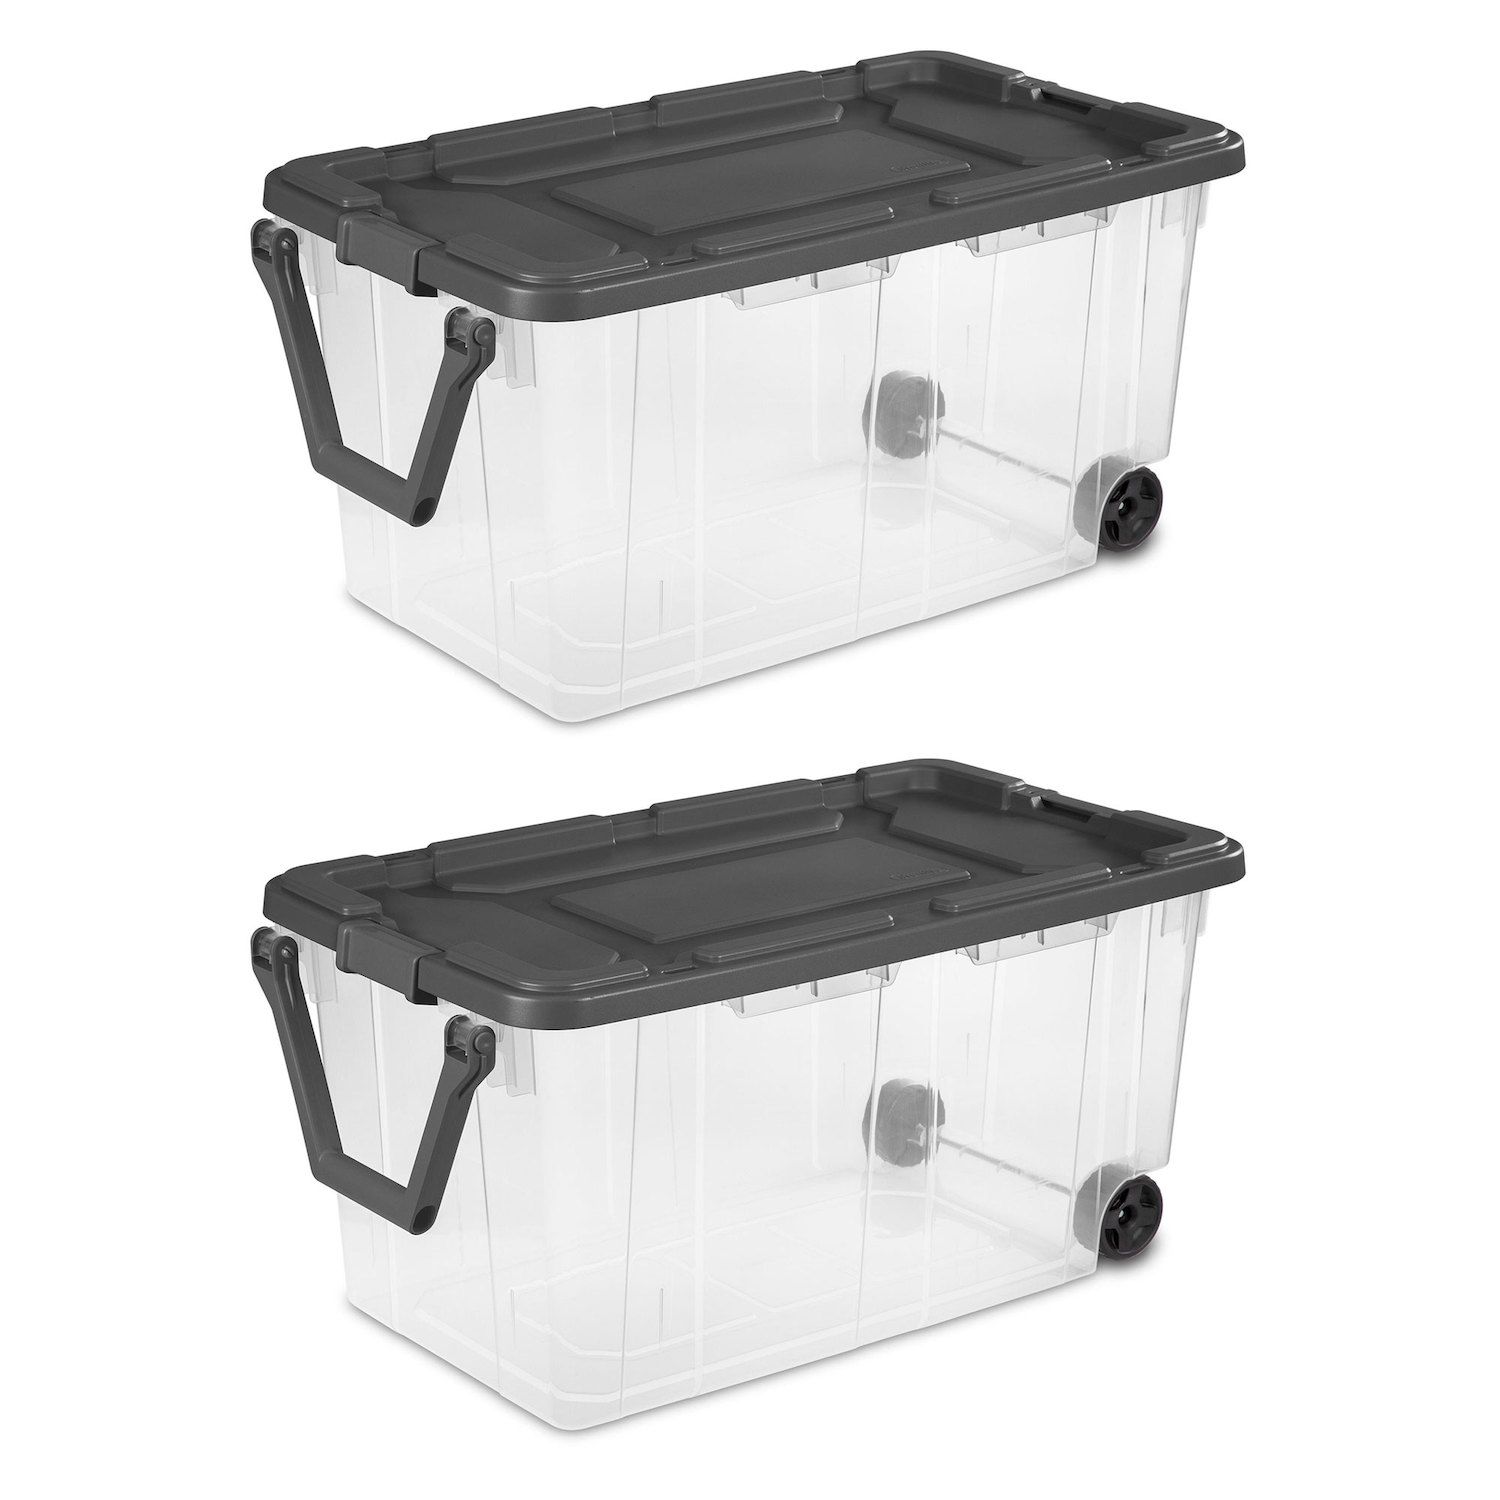 Sterilite Tuff1 30 gal. Plastic Storage Tote Container Bin with Lid (4-Pack)